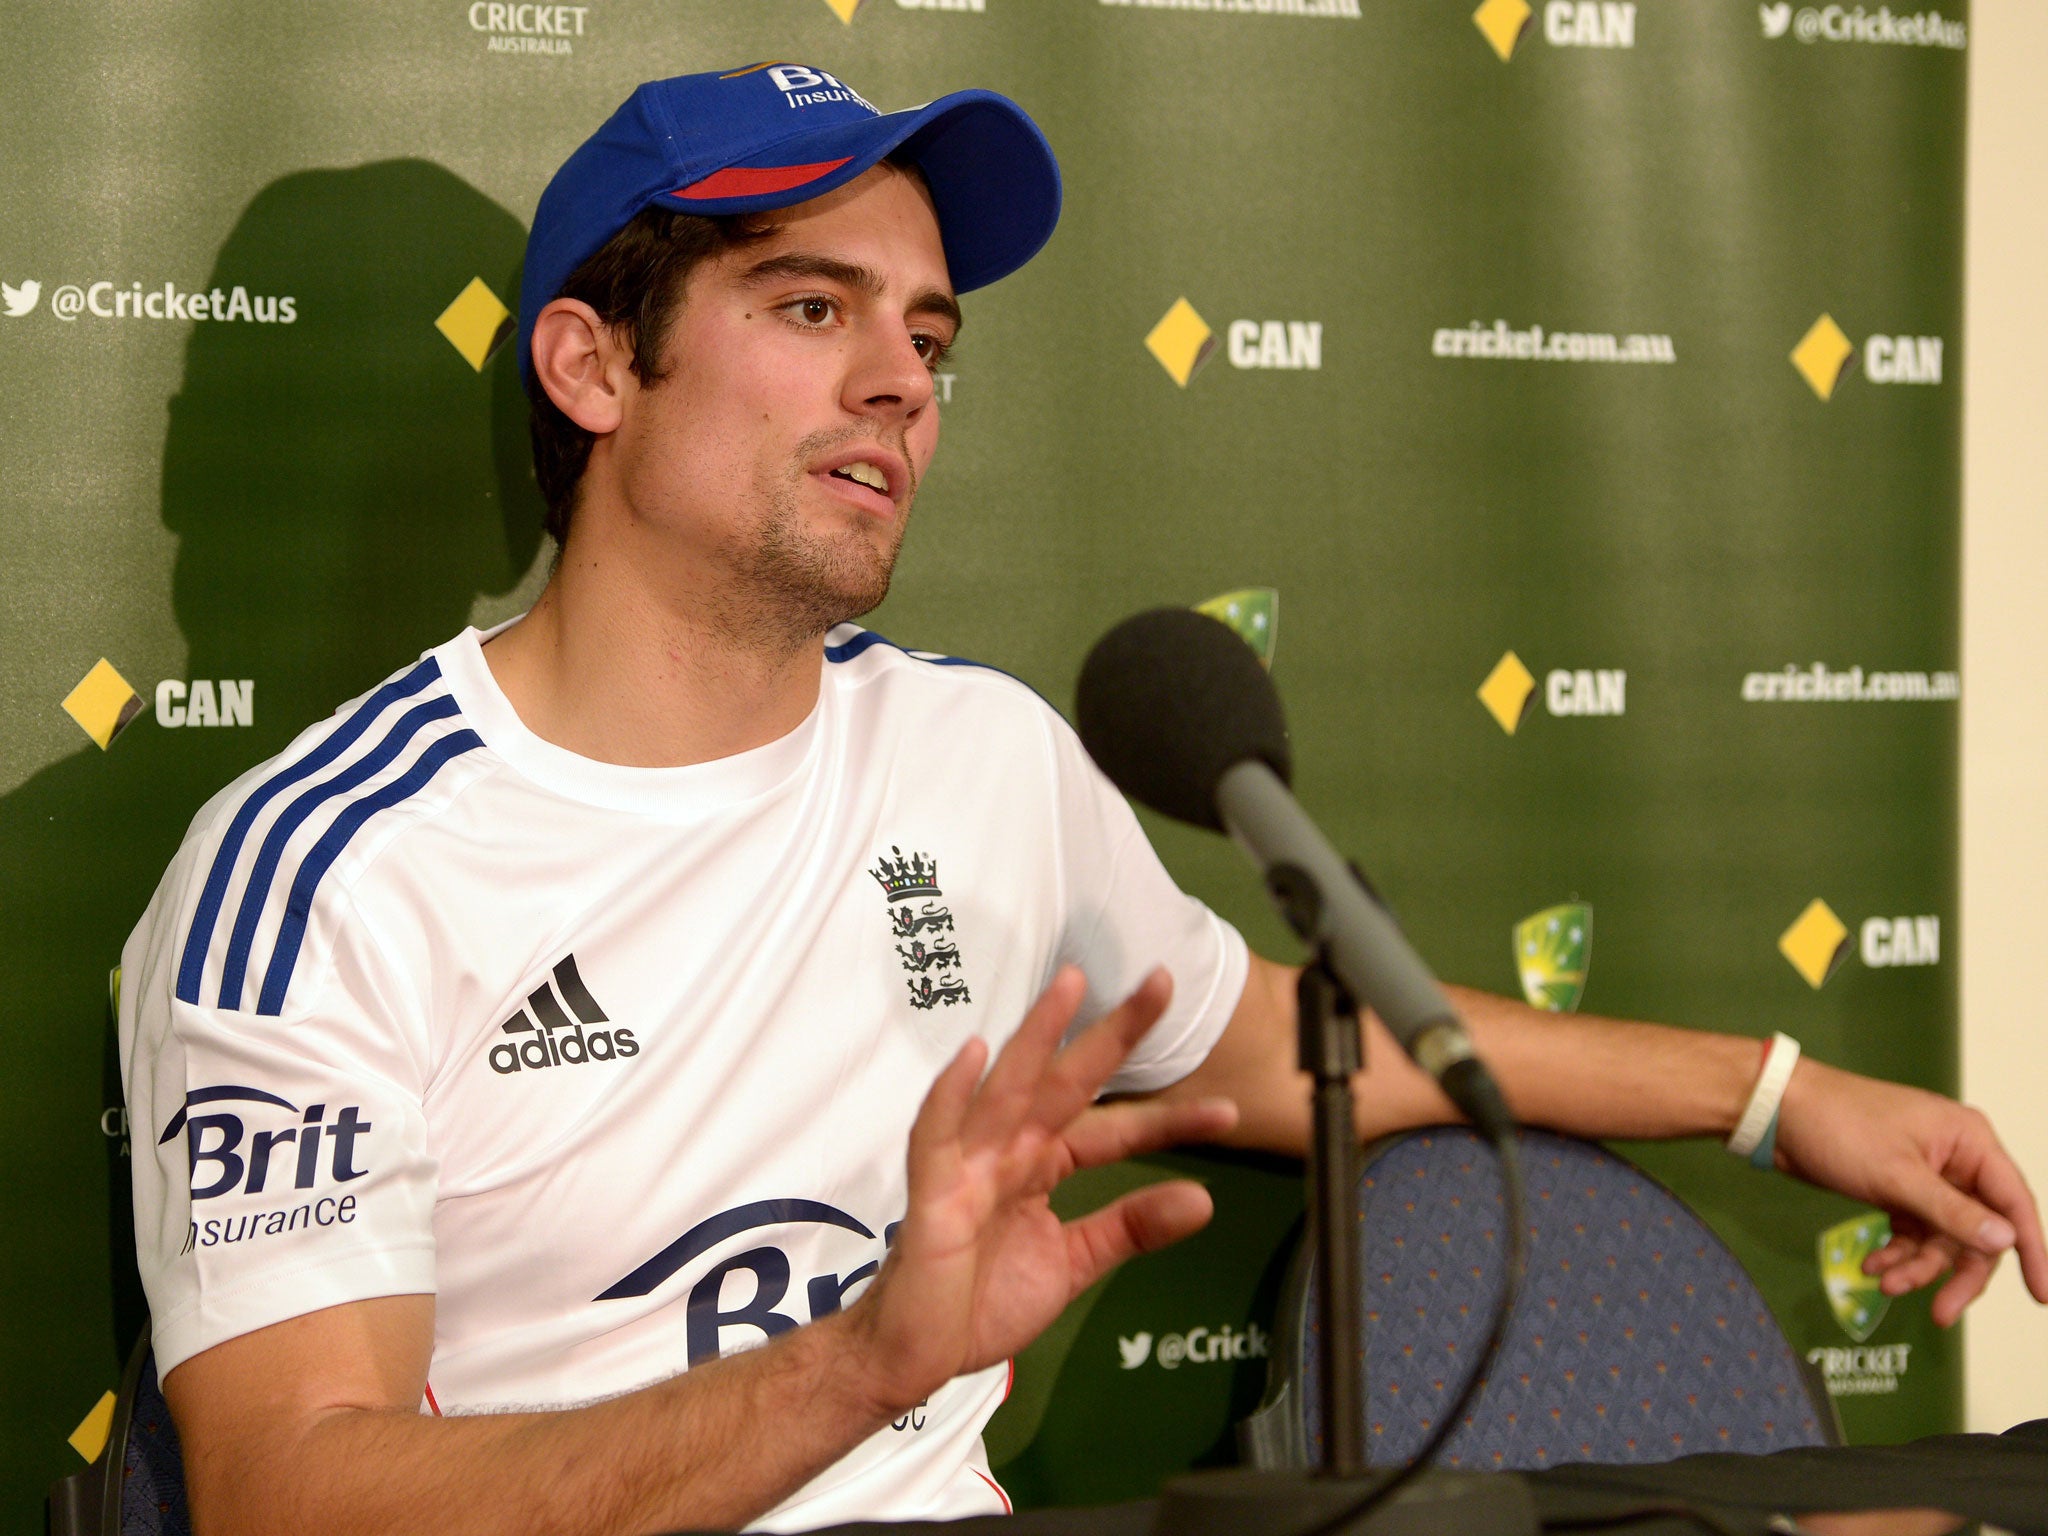 England Test cricket team captain Alastair Cook speaks during the official arrival media conference